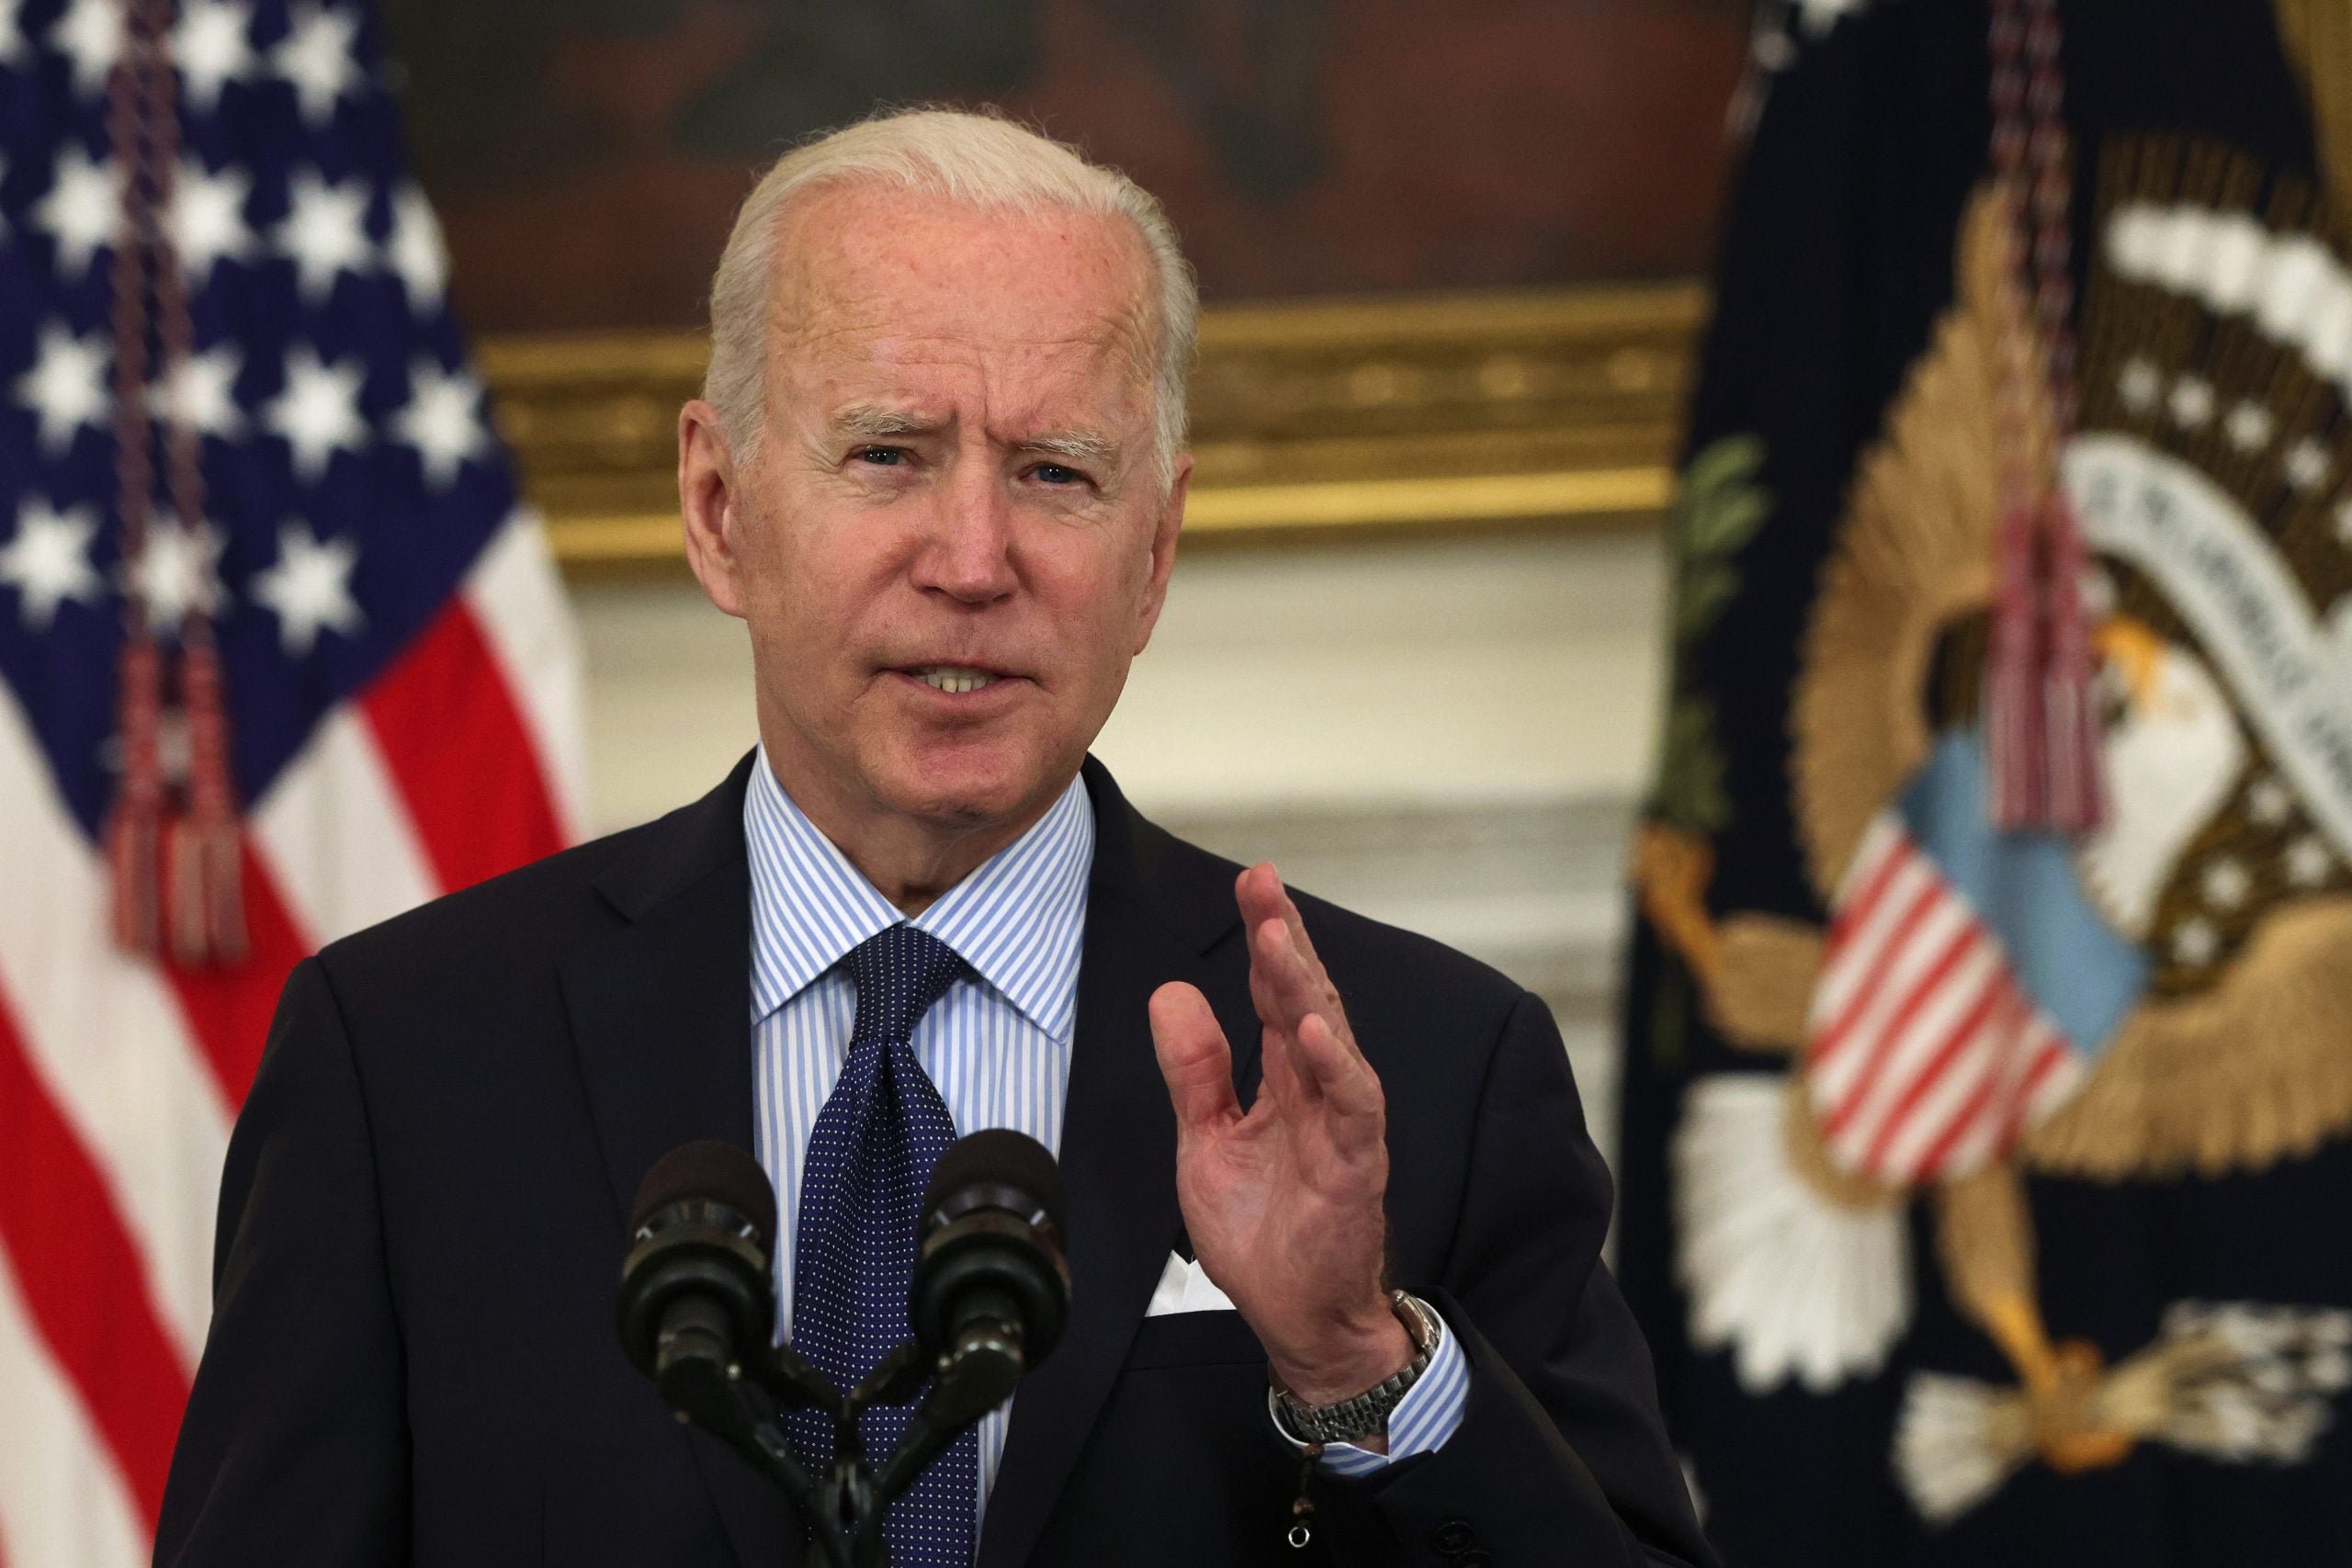 Biden-Harris Administration Announces New COVID-19 Benefits and Resources